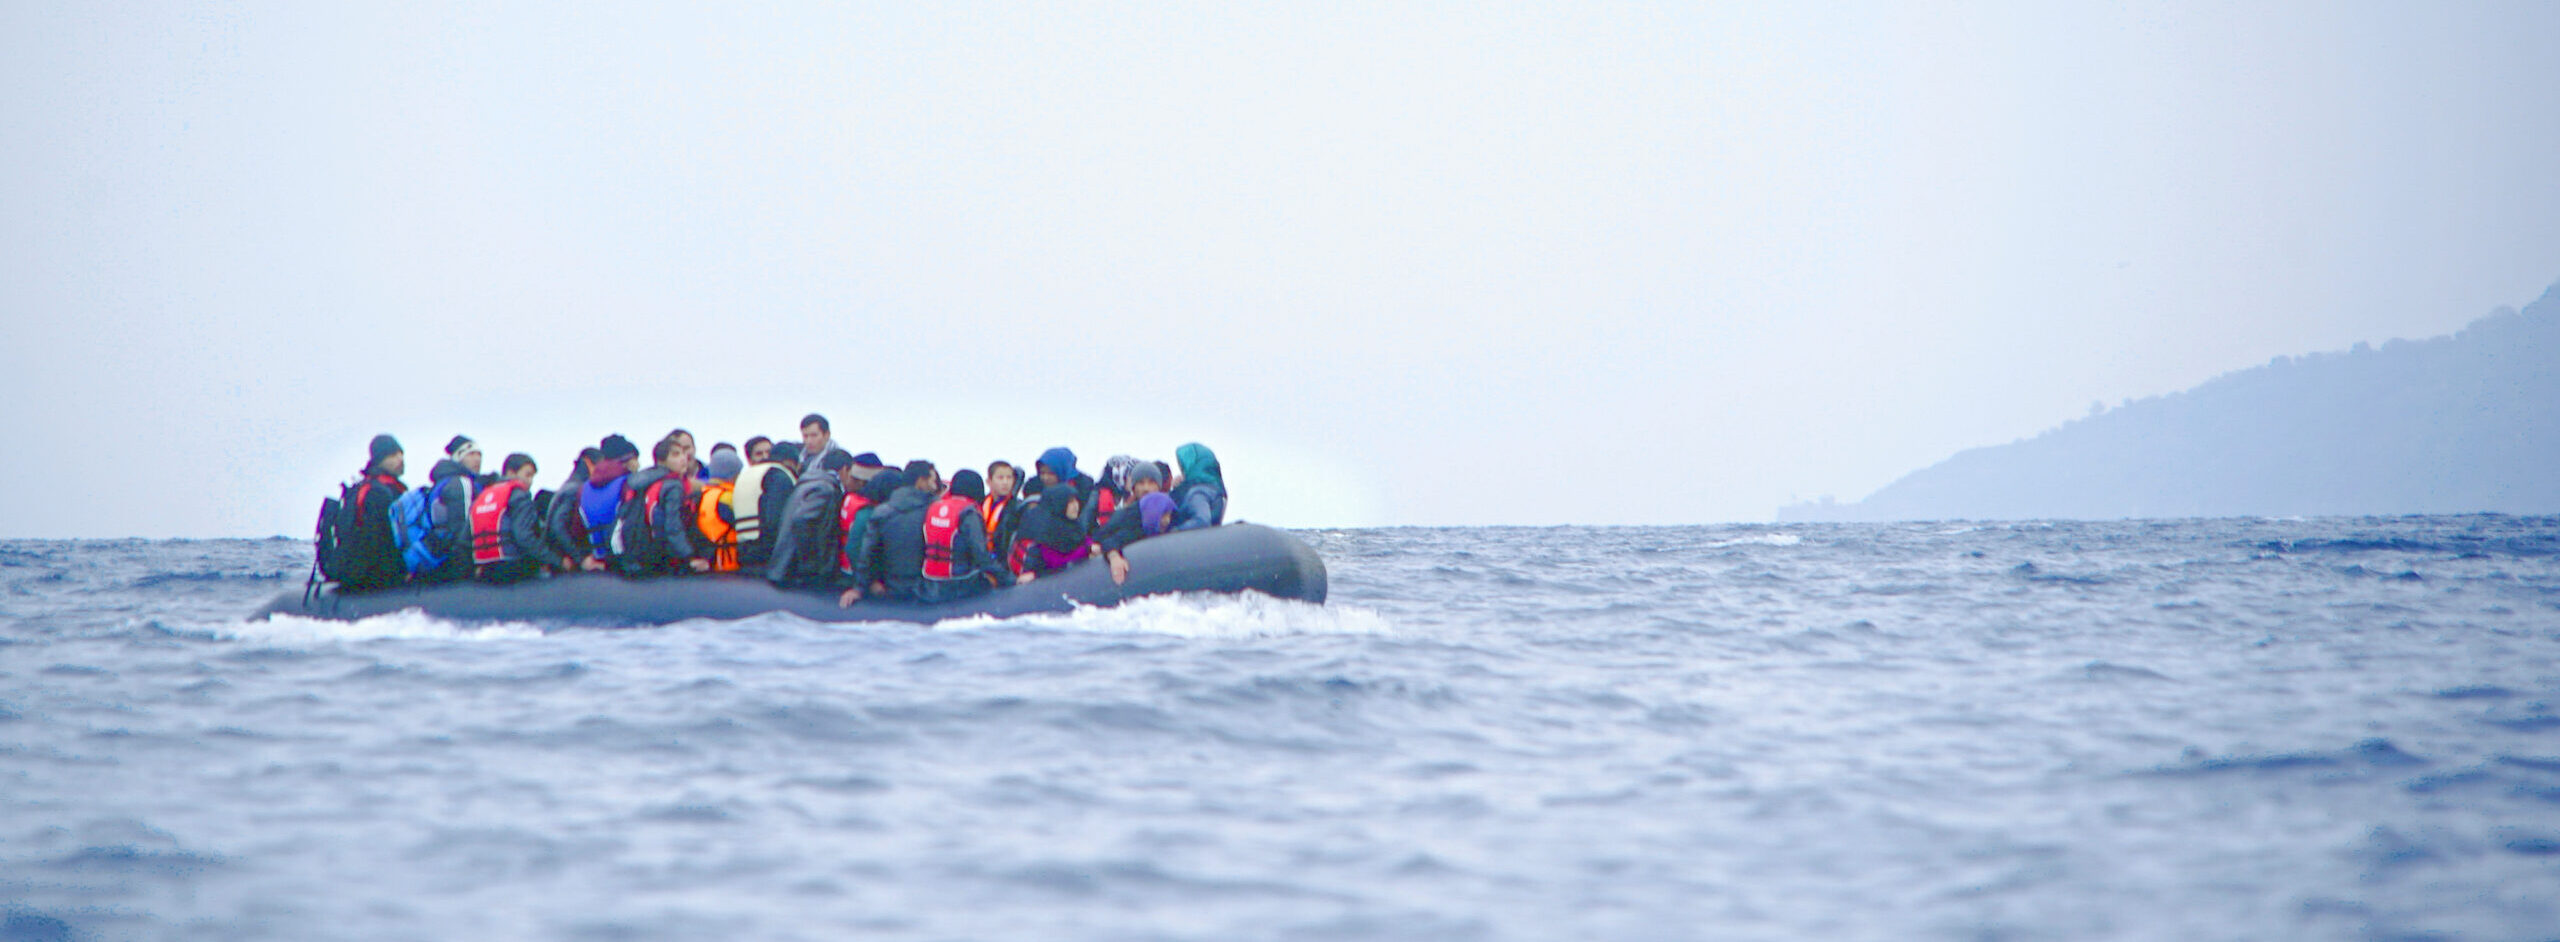 People on a small rubber boat in the ocean.